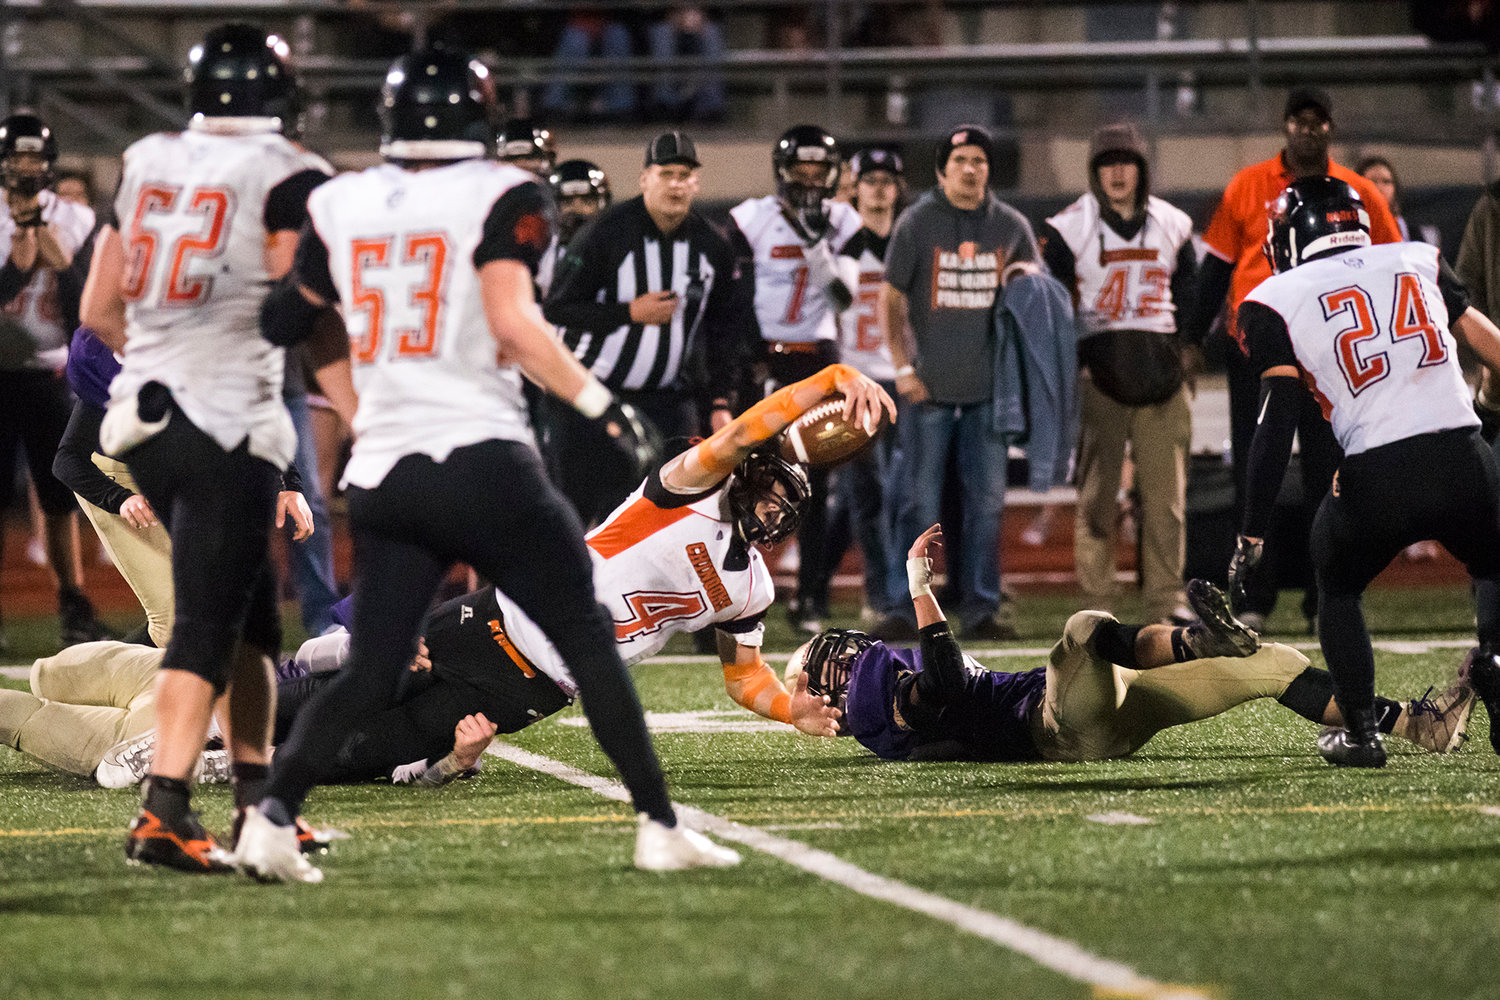 Images from the State 2B Championship football game between Onalaska and Kalama at Harry Lang Stadium in Lakewood on Saturday, Dec. 7, 2019.